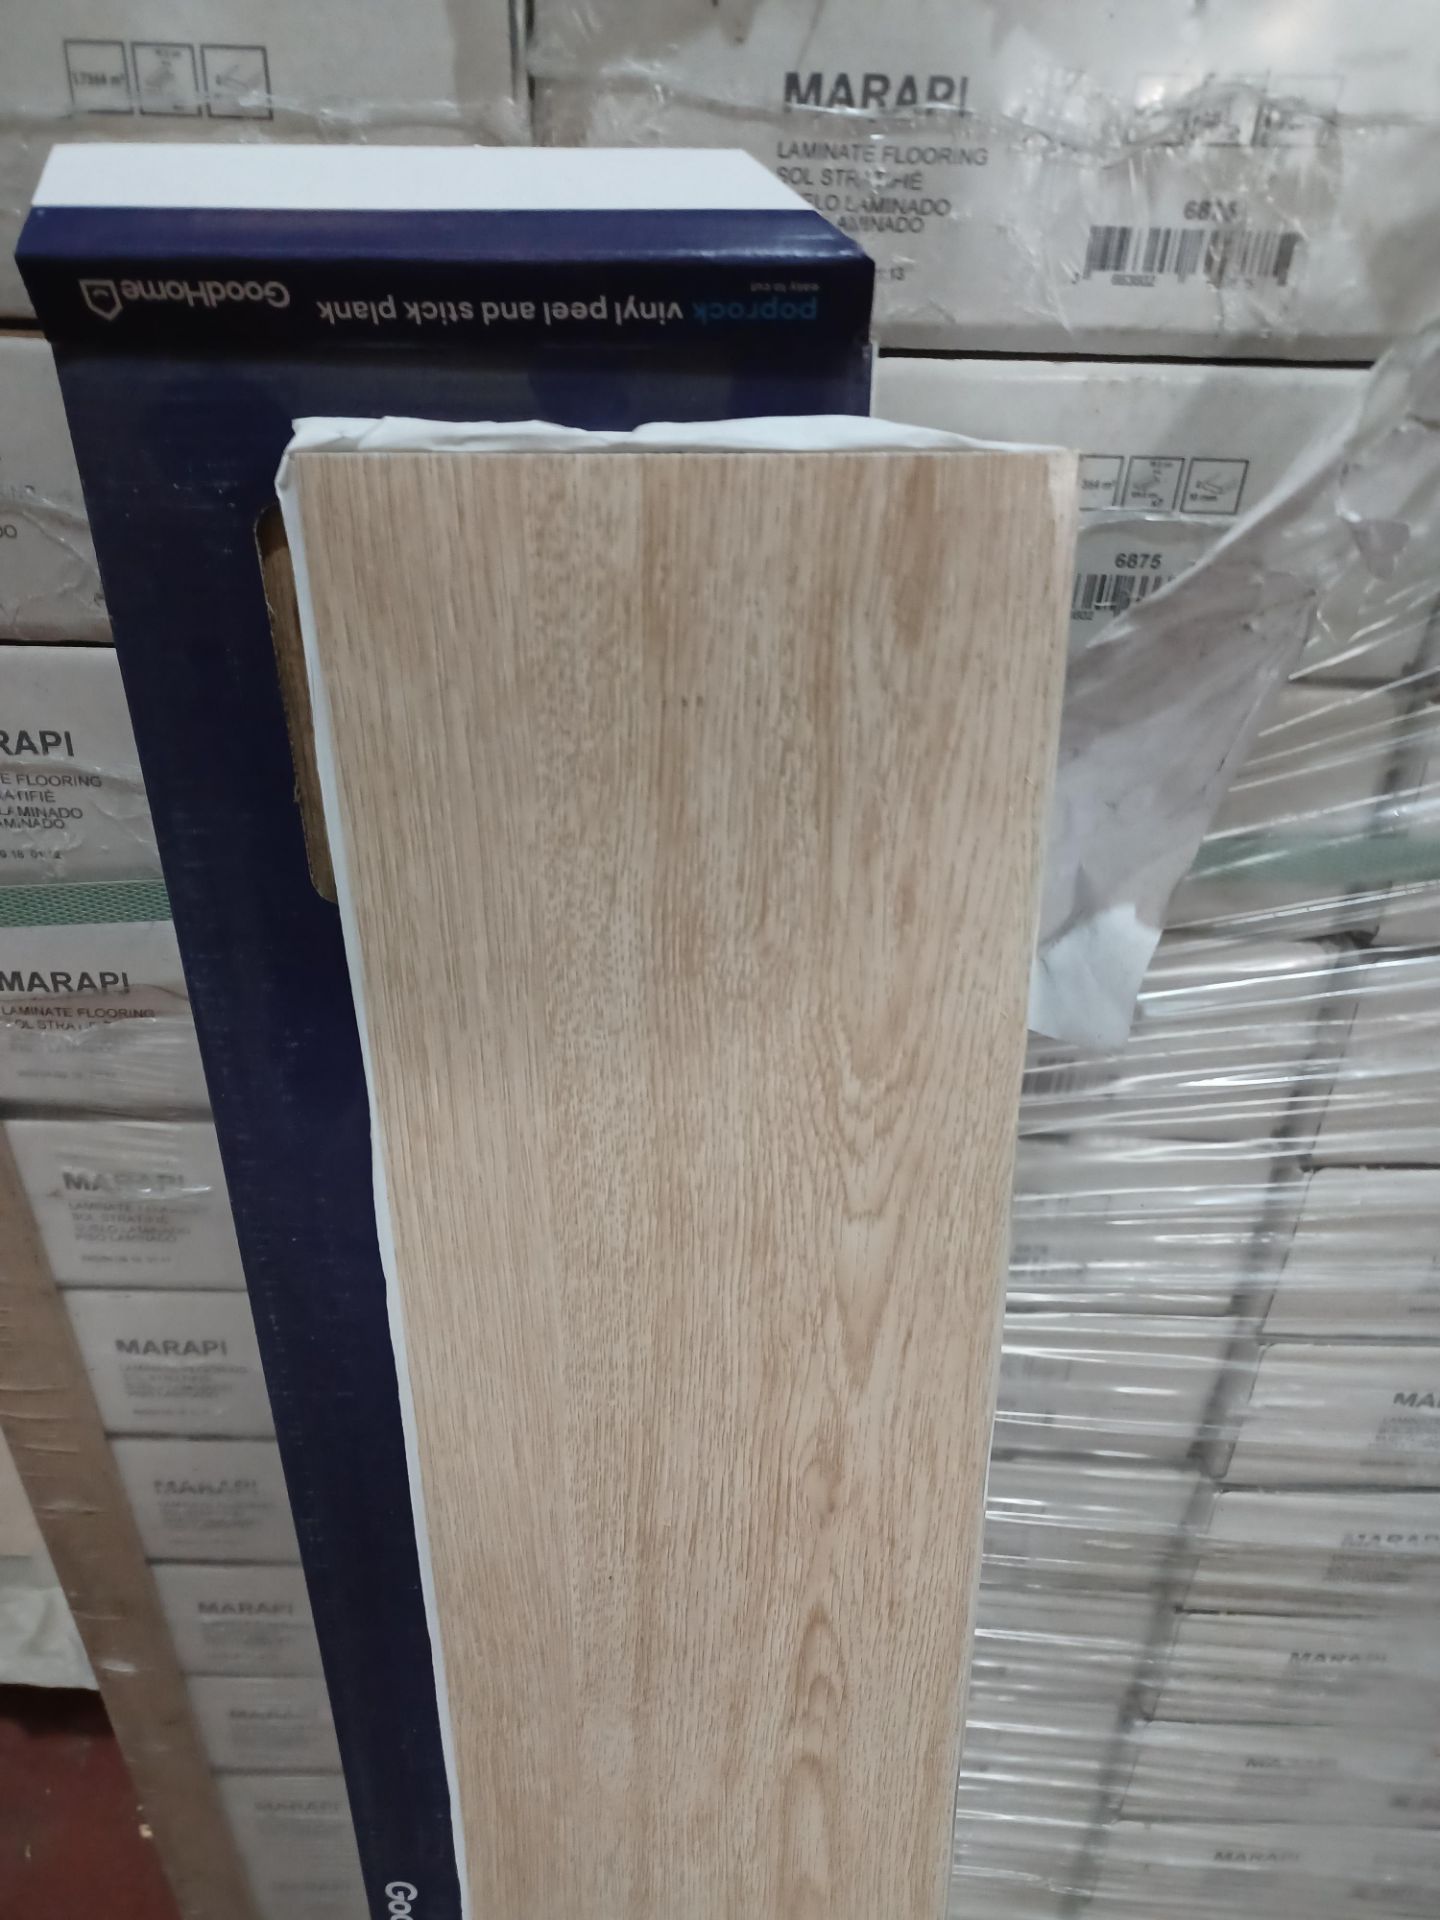 22 X PACKS OF POPROCK VINYL PEEL AND STICK PLANK FLOORING. EACH PACK CONTAINS 1.11m2 GIVING THIS LOT - Image 2 of 2